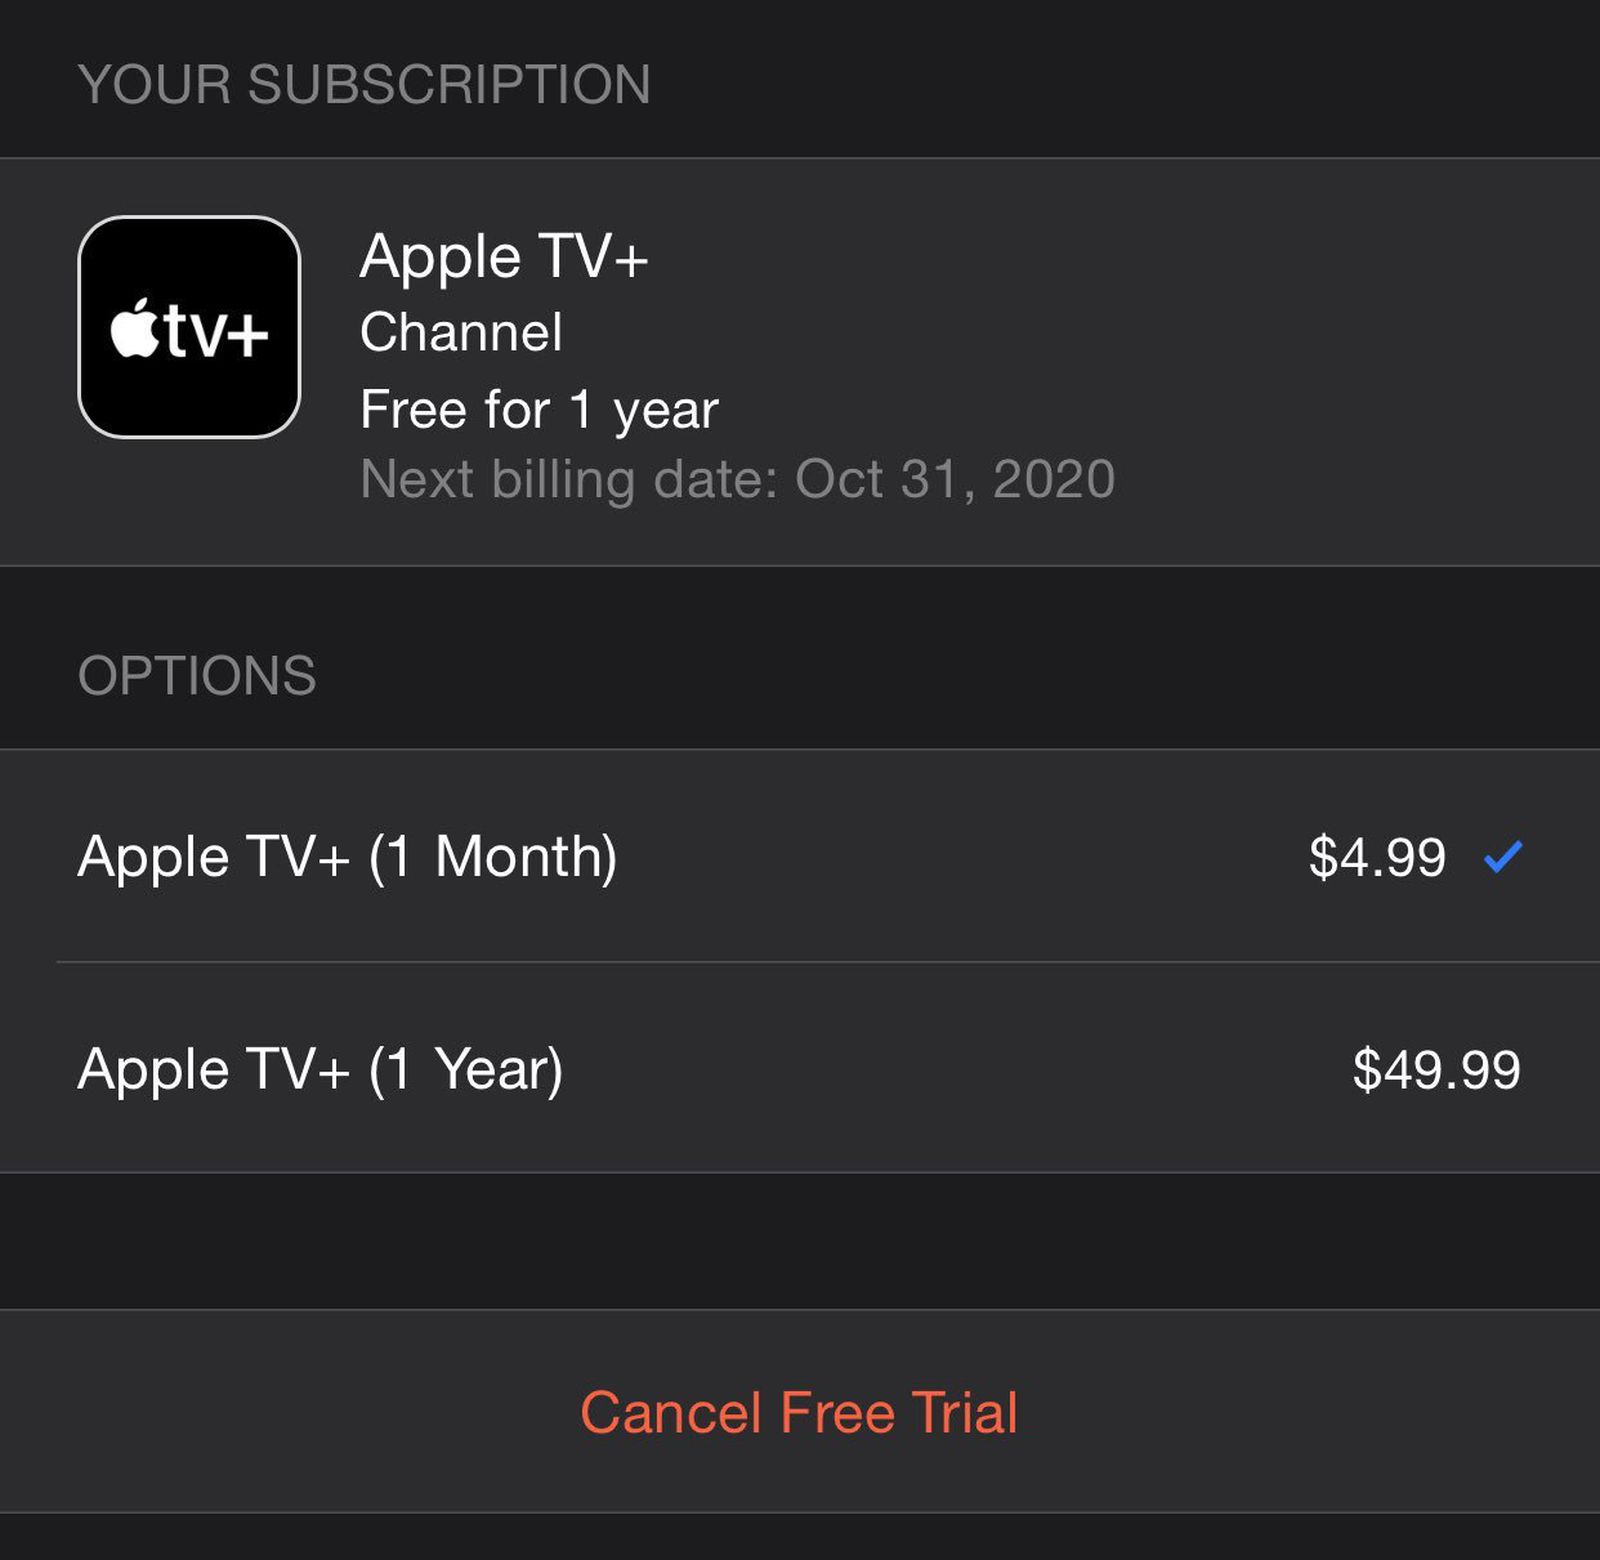 Apple TV+ Launches With New $49.99 Annual Subscription Save $10 Per Year - MacRumors